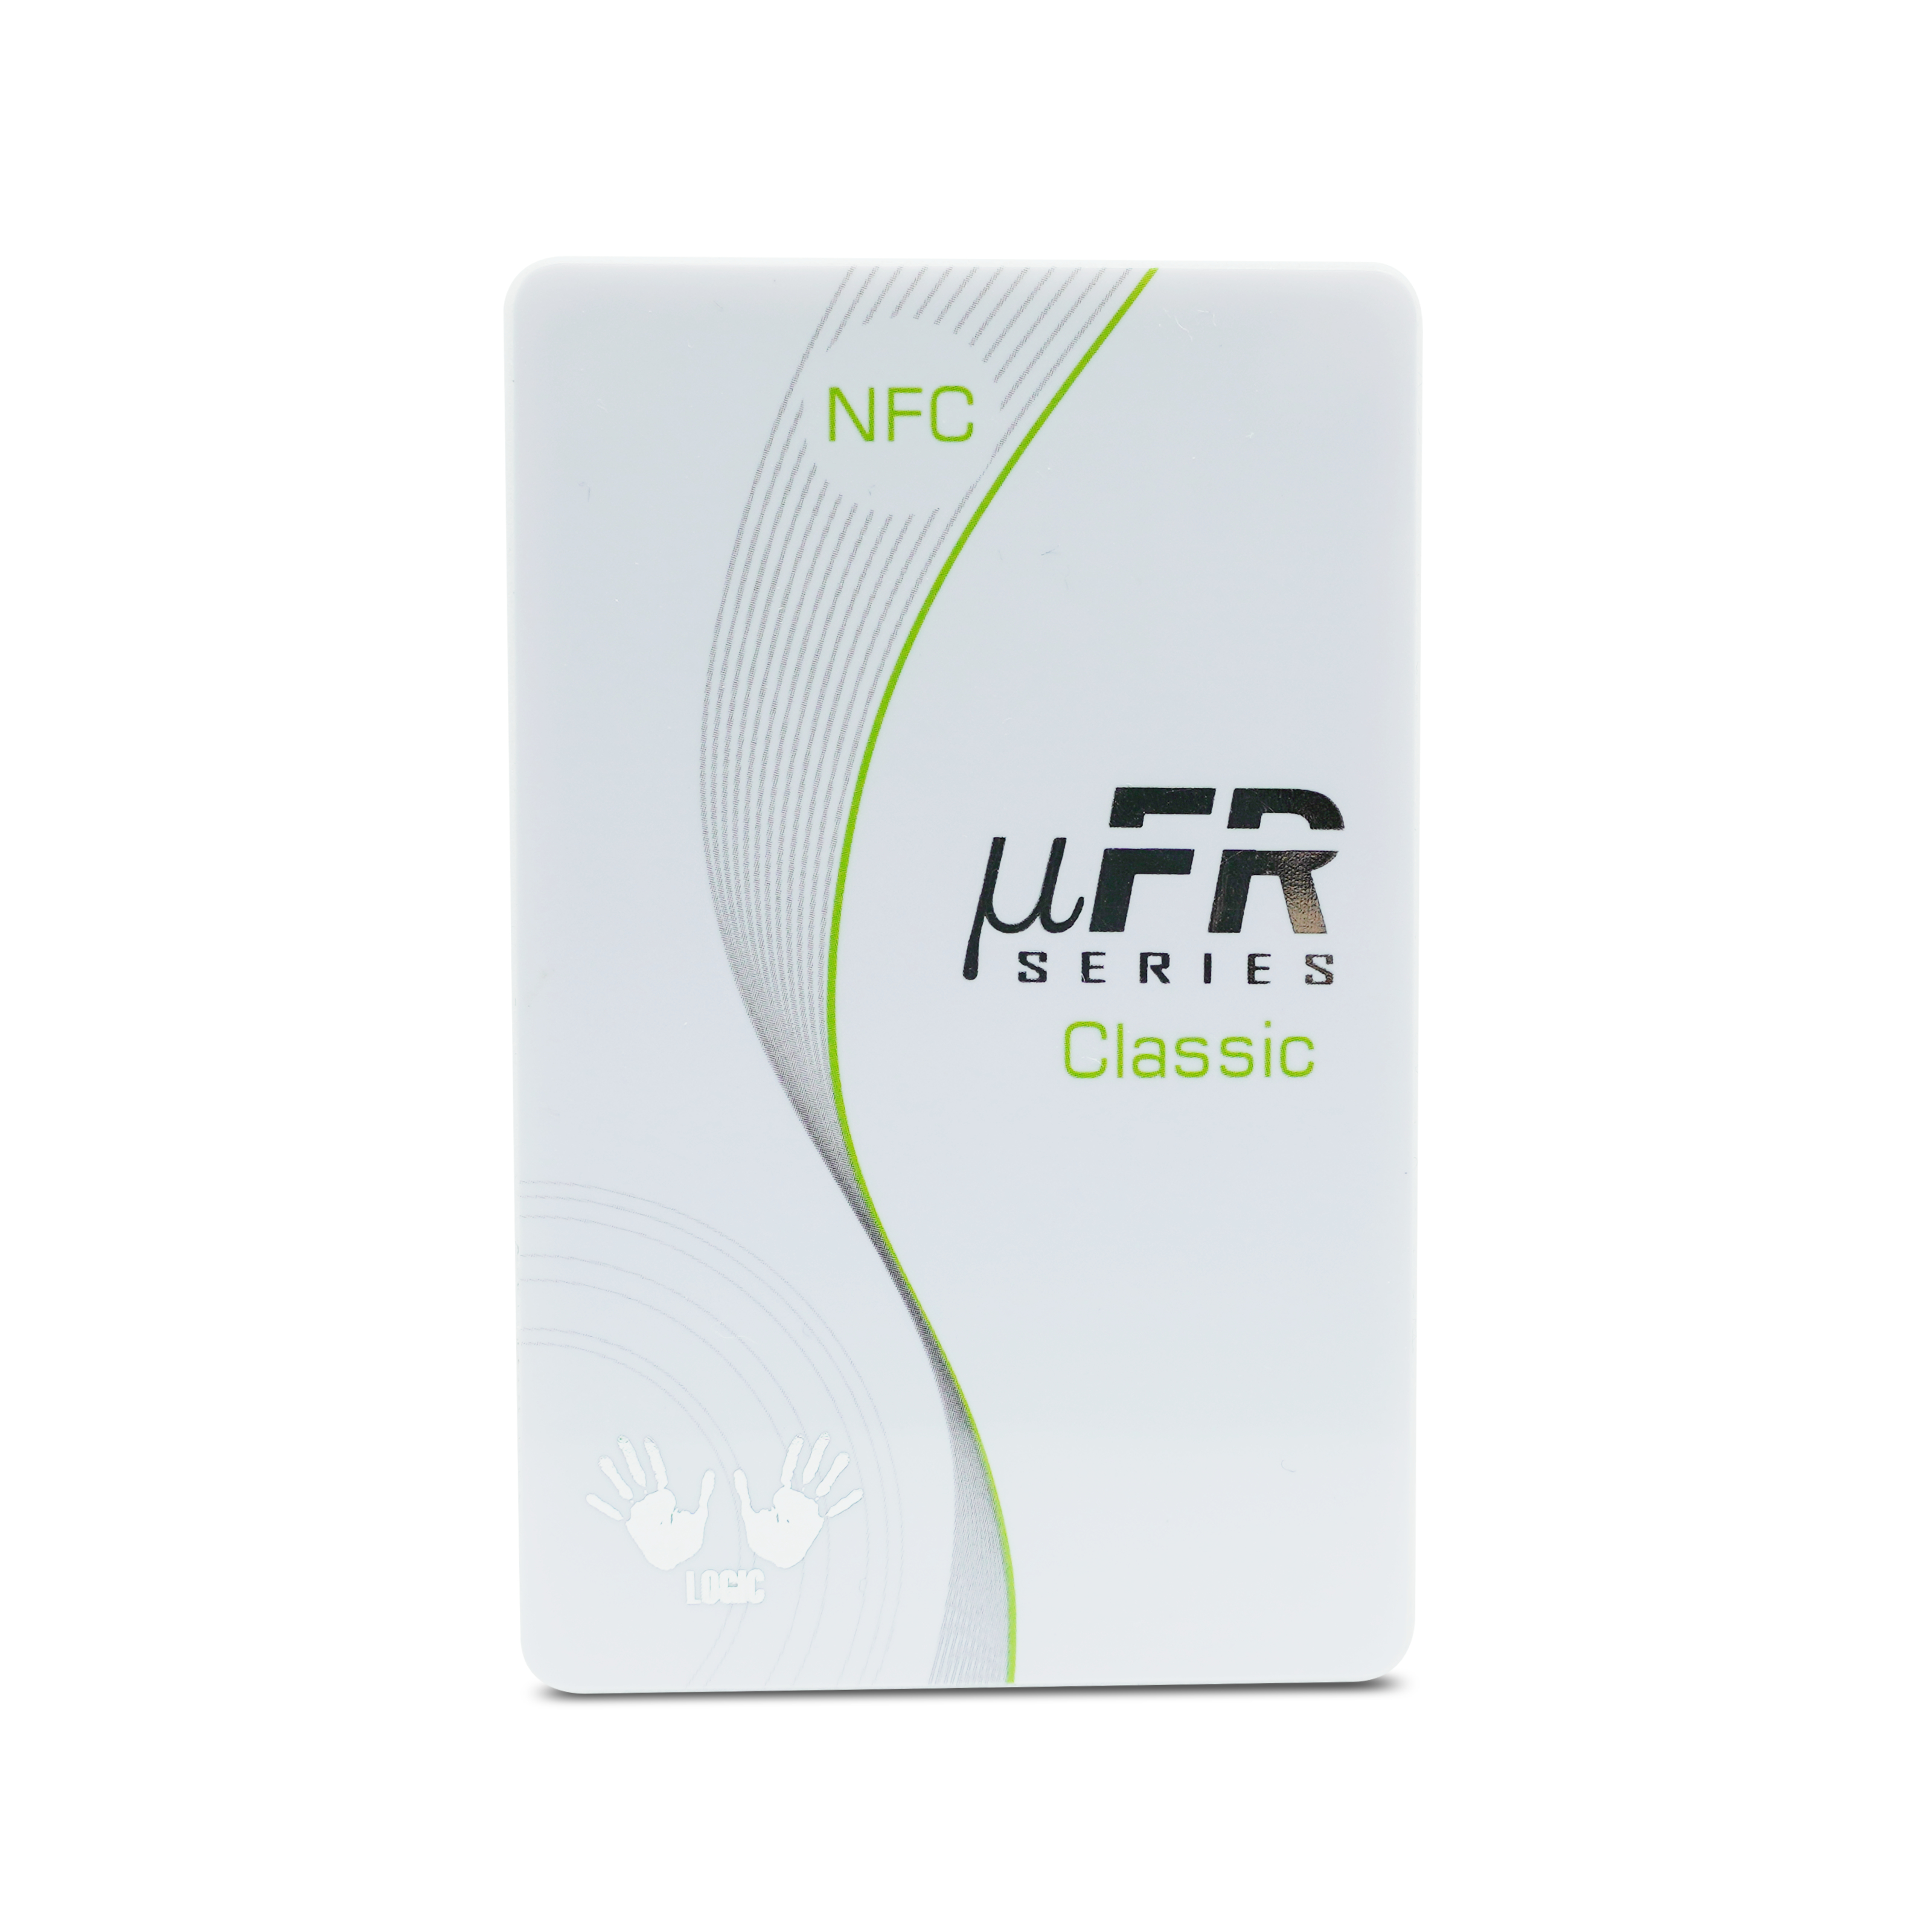 NFC Reader / Writer - uFR Classic CS - white / green - with range booster function